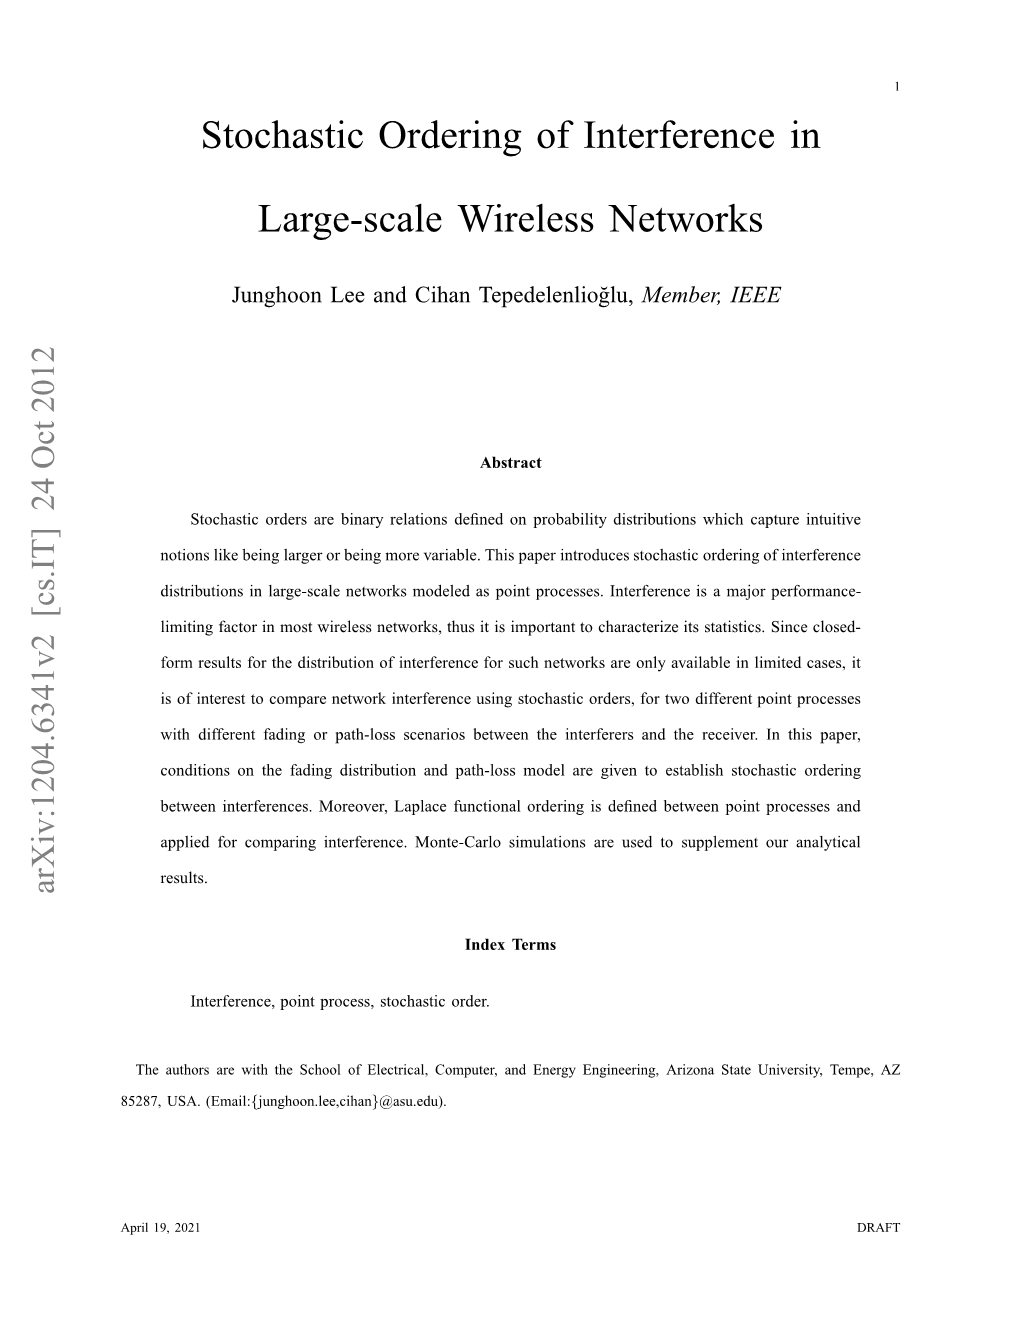 Stochastic Ordering of Interferences in Large-Scale Wireless Networks